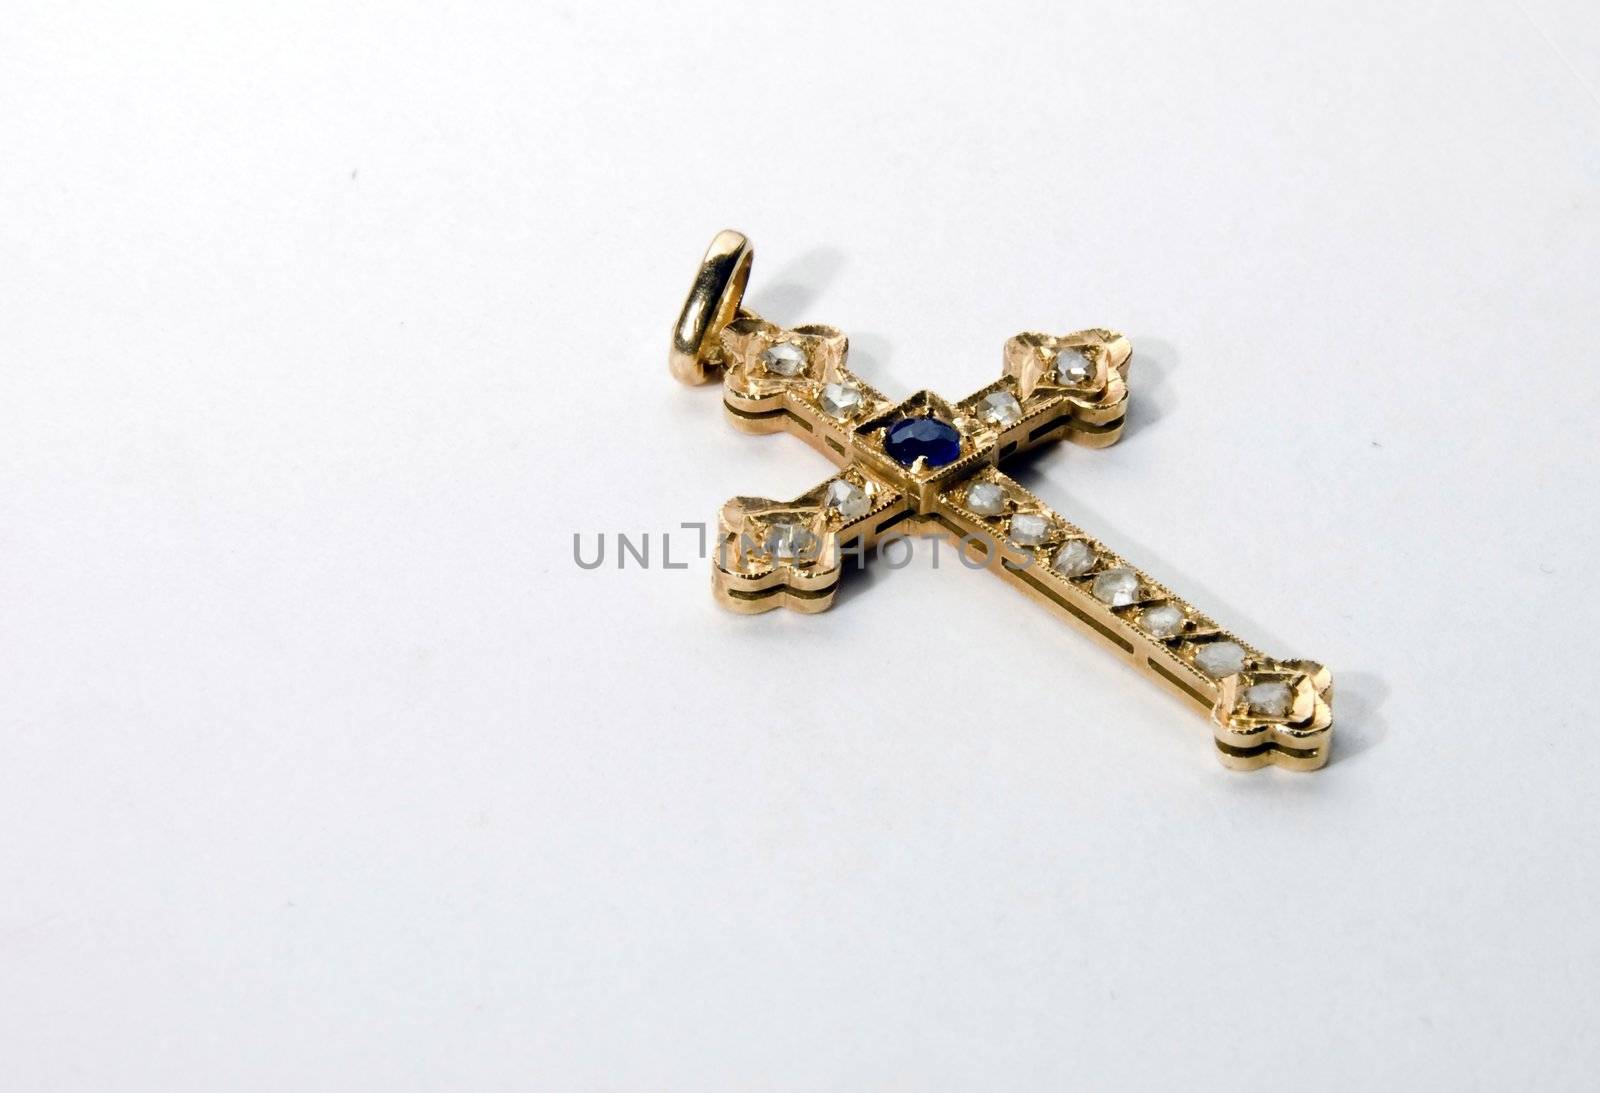 Antique Gold Cross Pendant by PhotoWorks